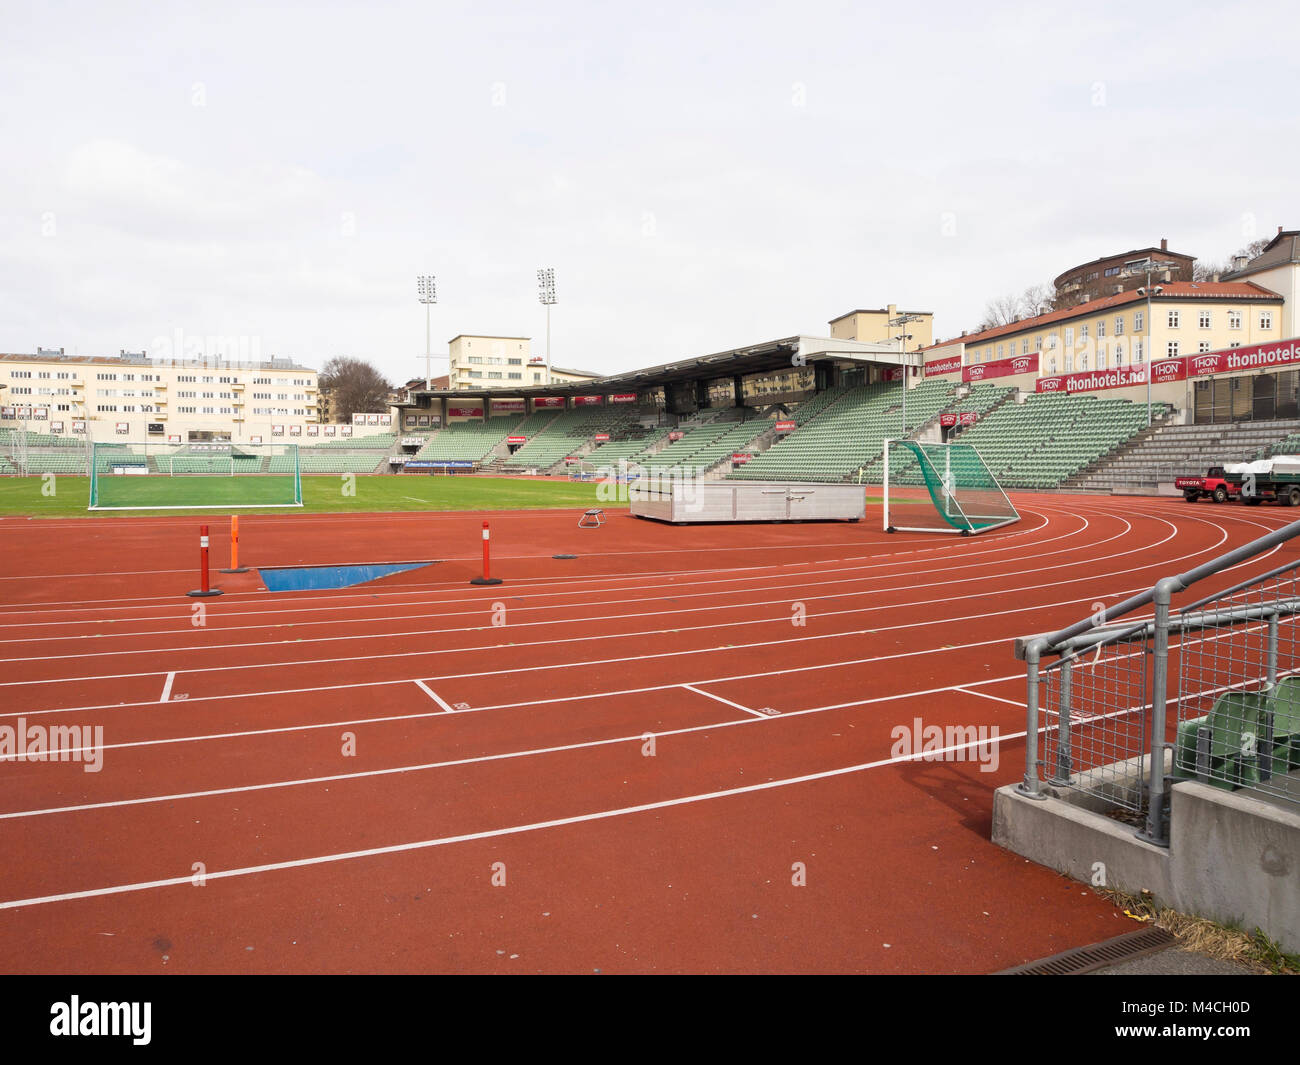 Bislett stadion (stadium) in Oslo Norway famous for the annual Bislett Games, an athletics event with world stars, overview with next door apartments Stock Photo